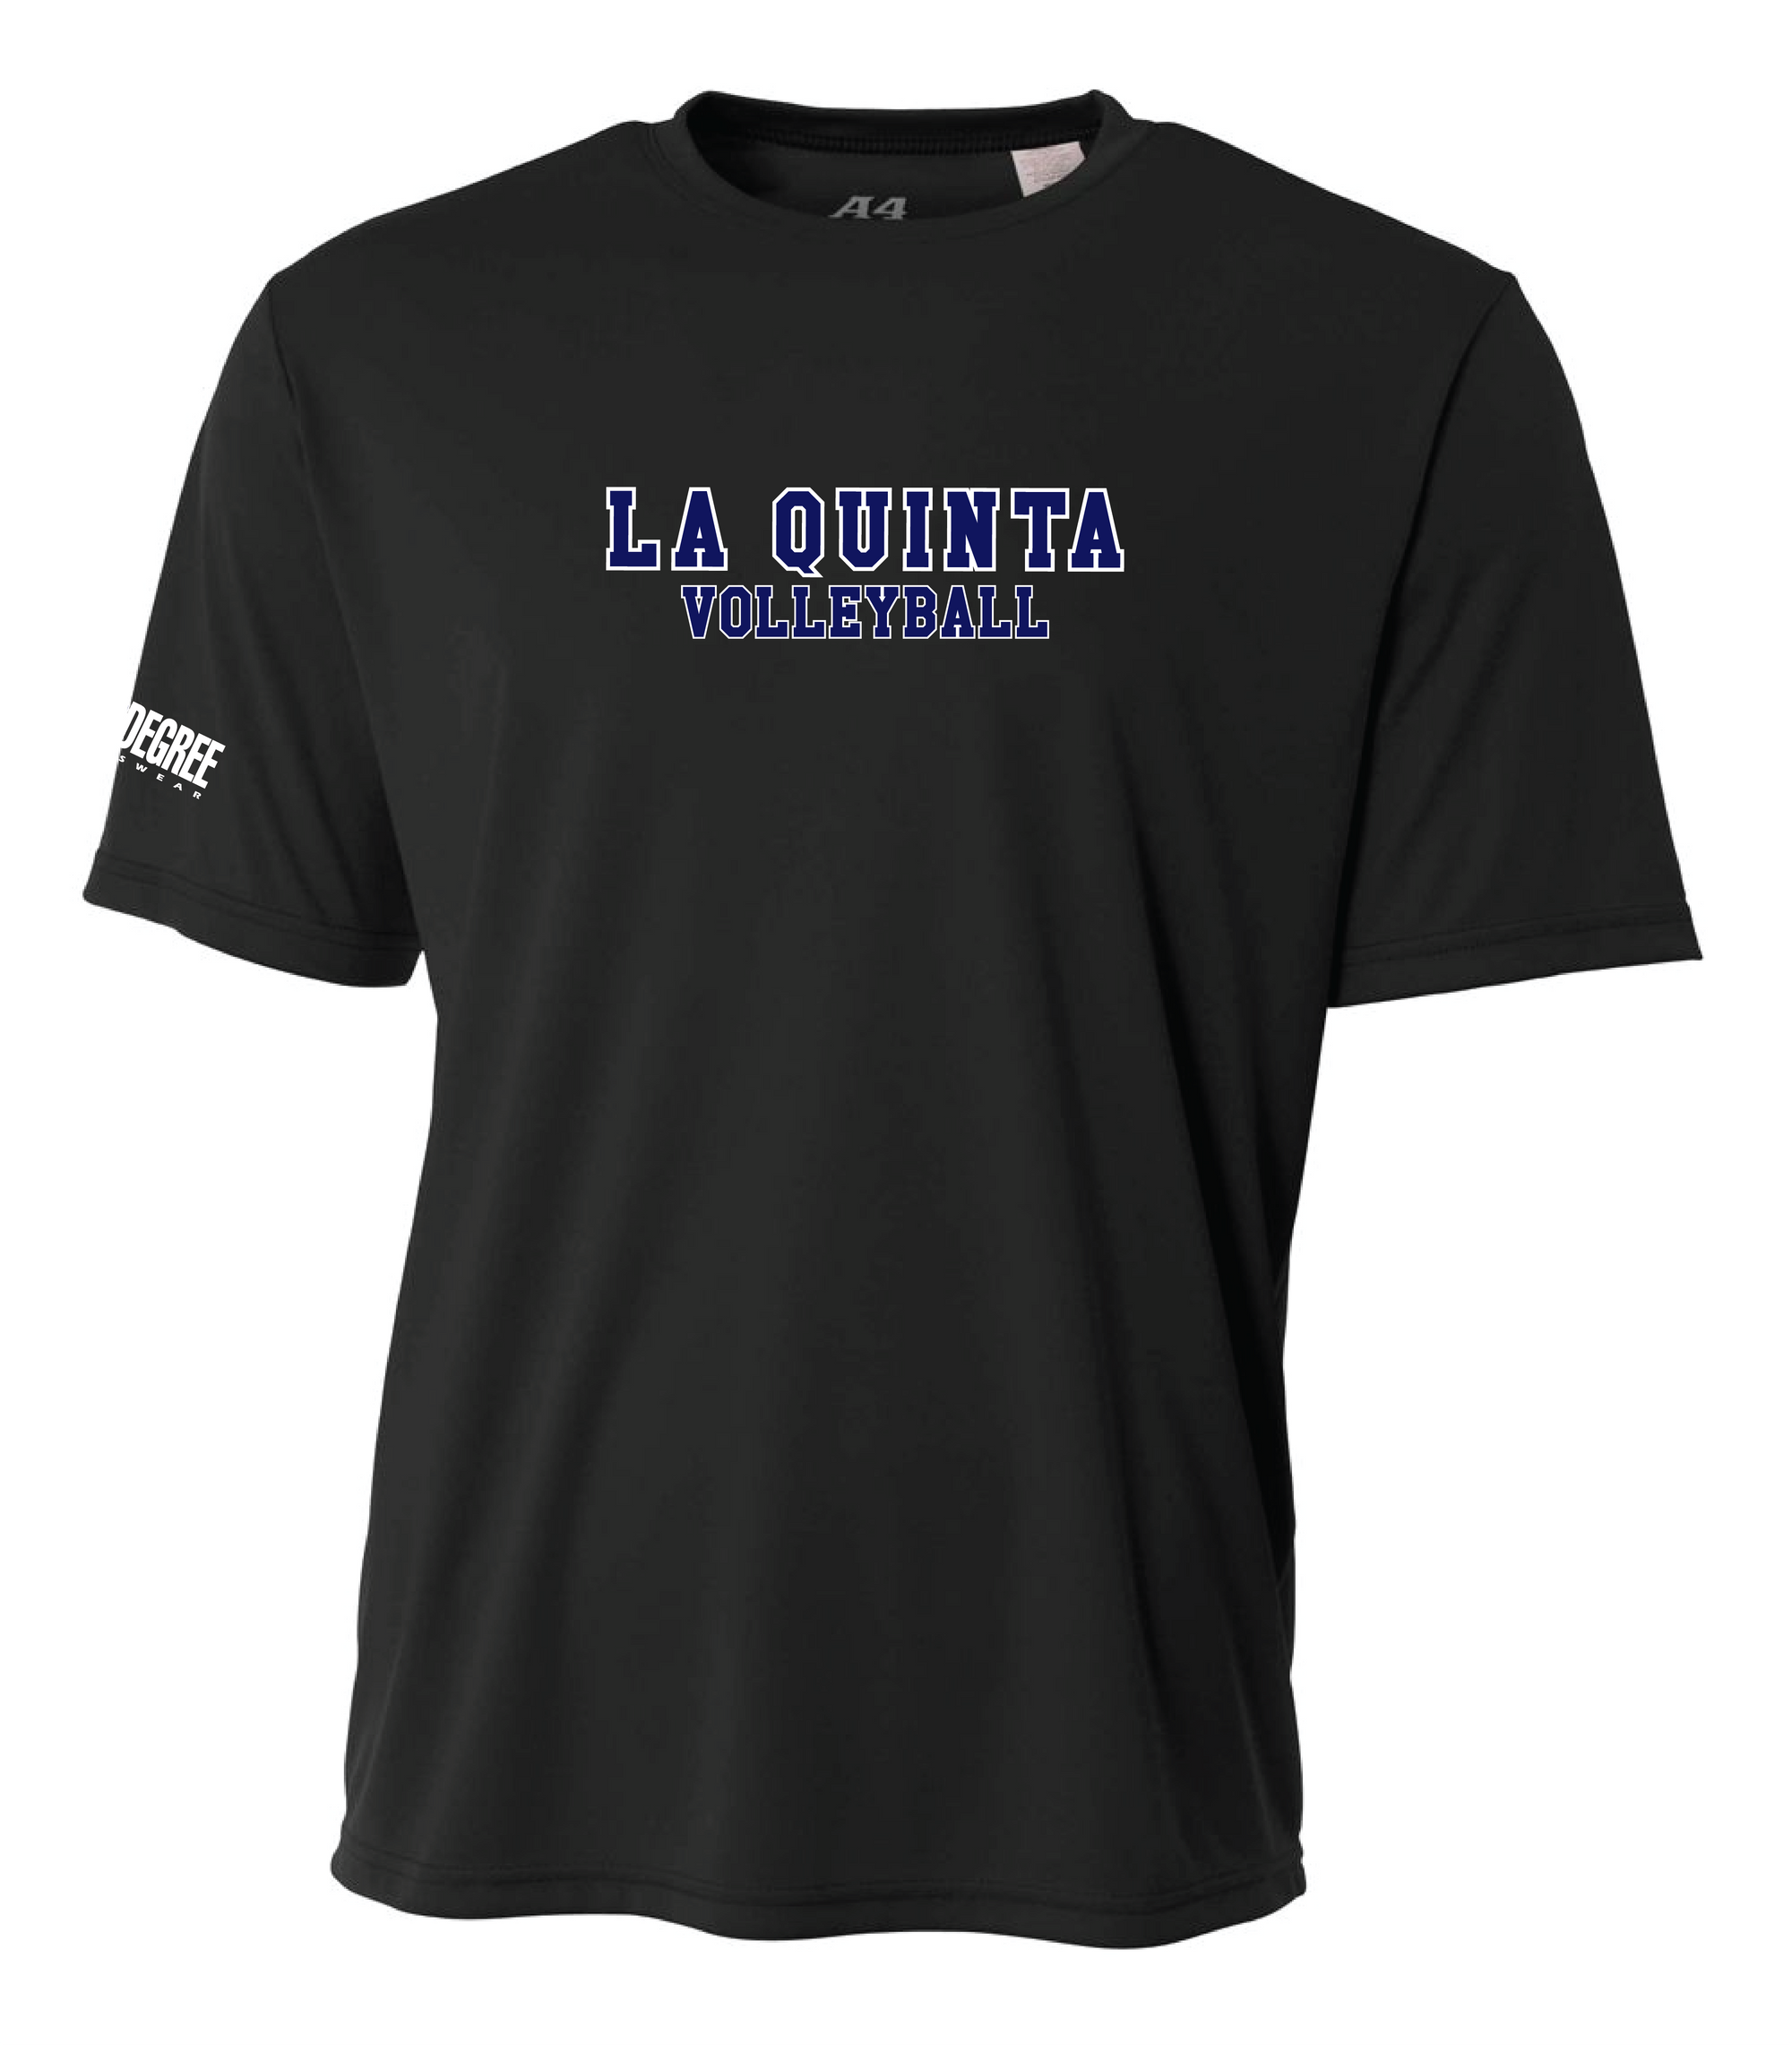 La Quinta Volleyball Unisex DRY FIT T-Shirt